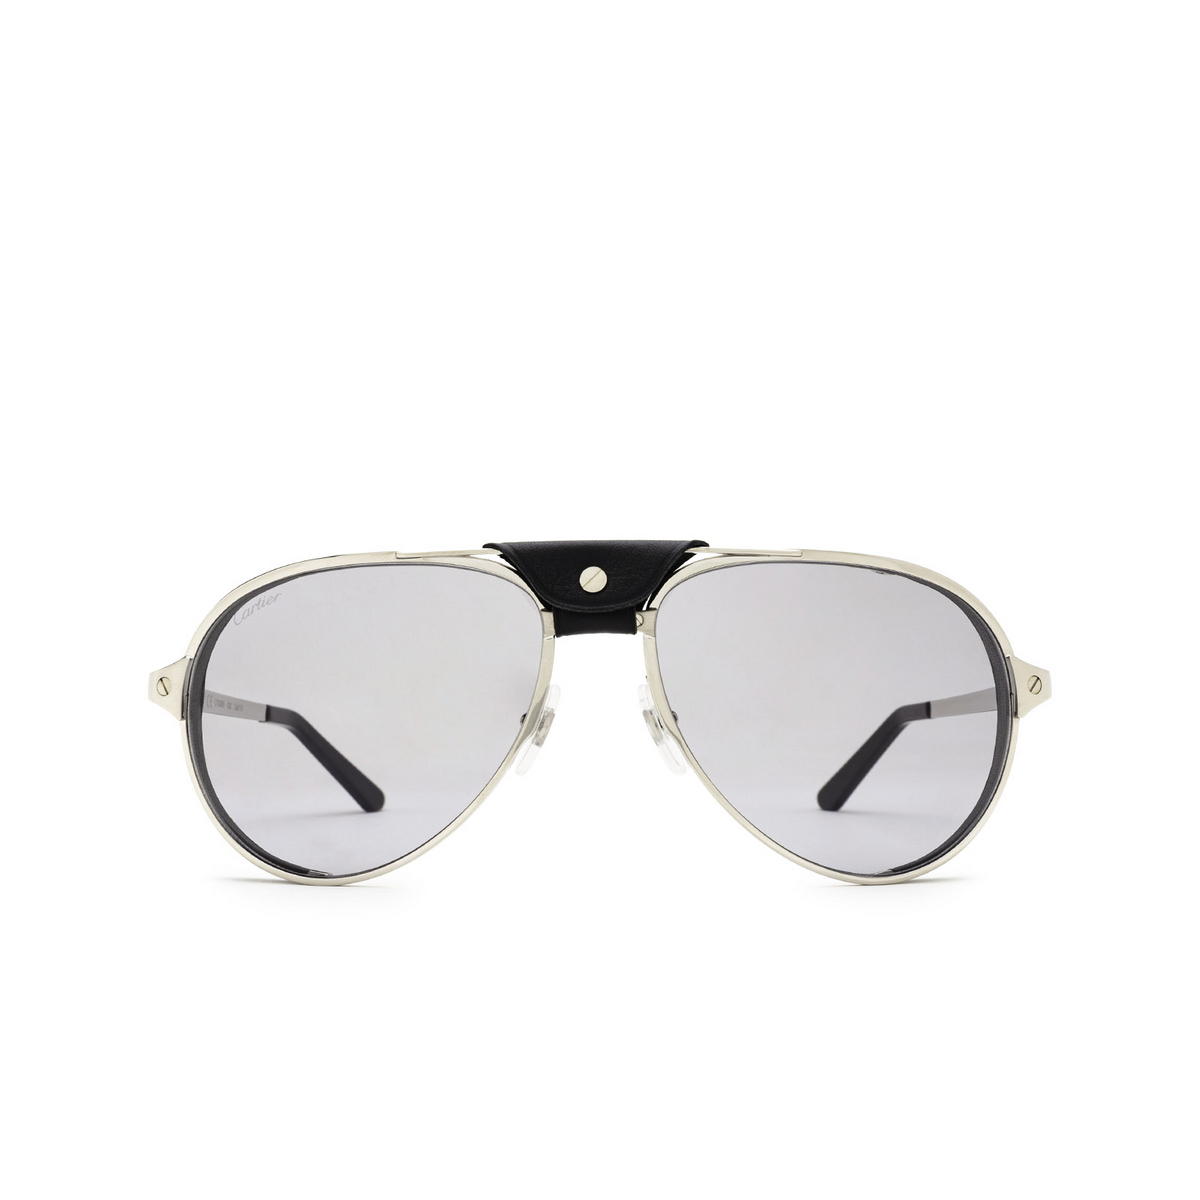 Cartier CT0296S Sunglasses 002 Silver - front view